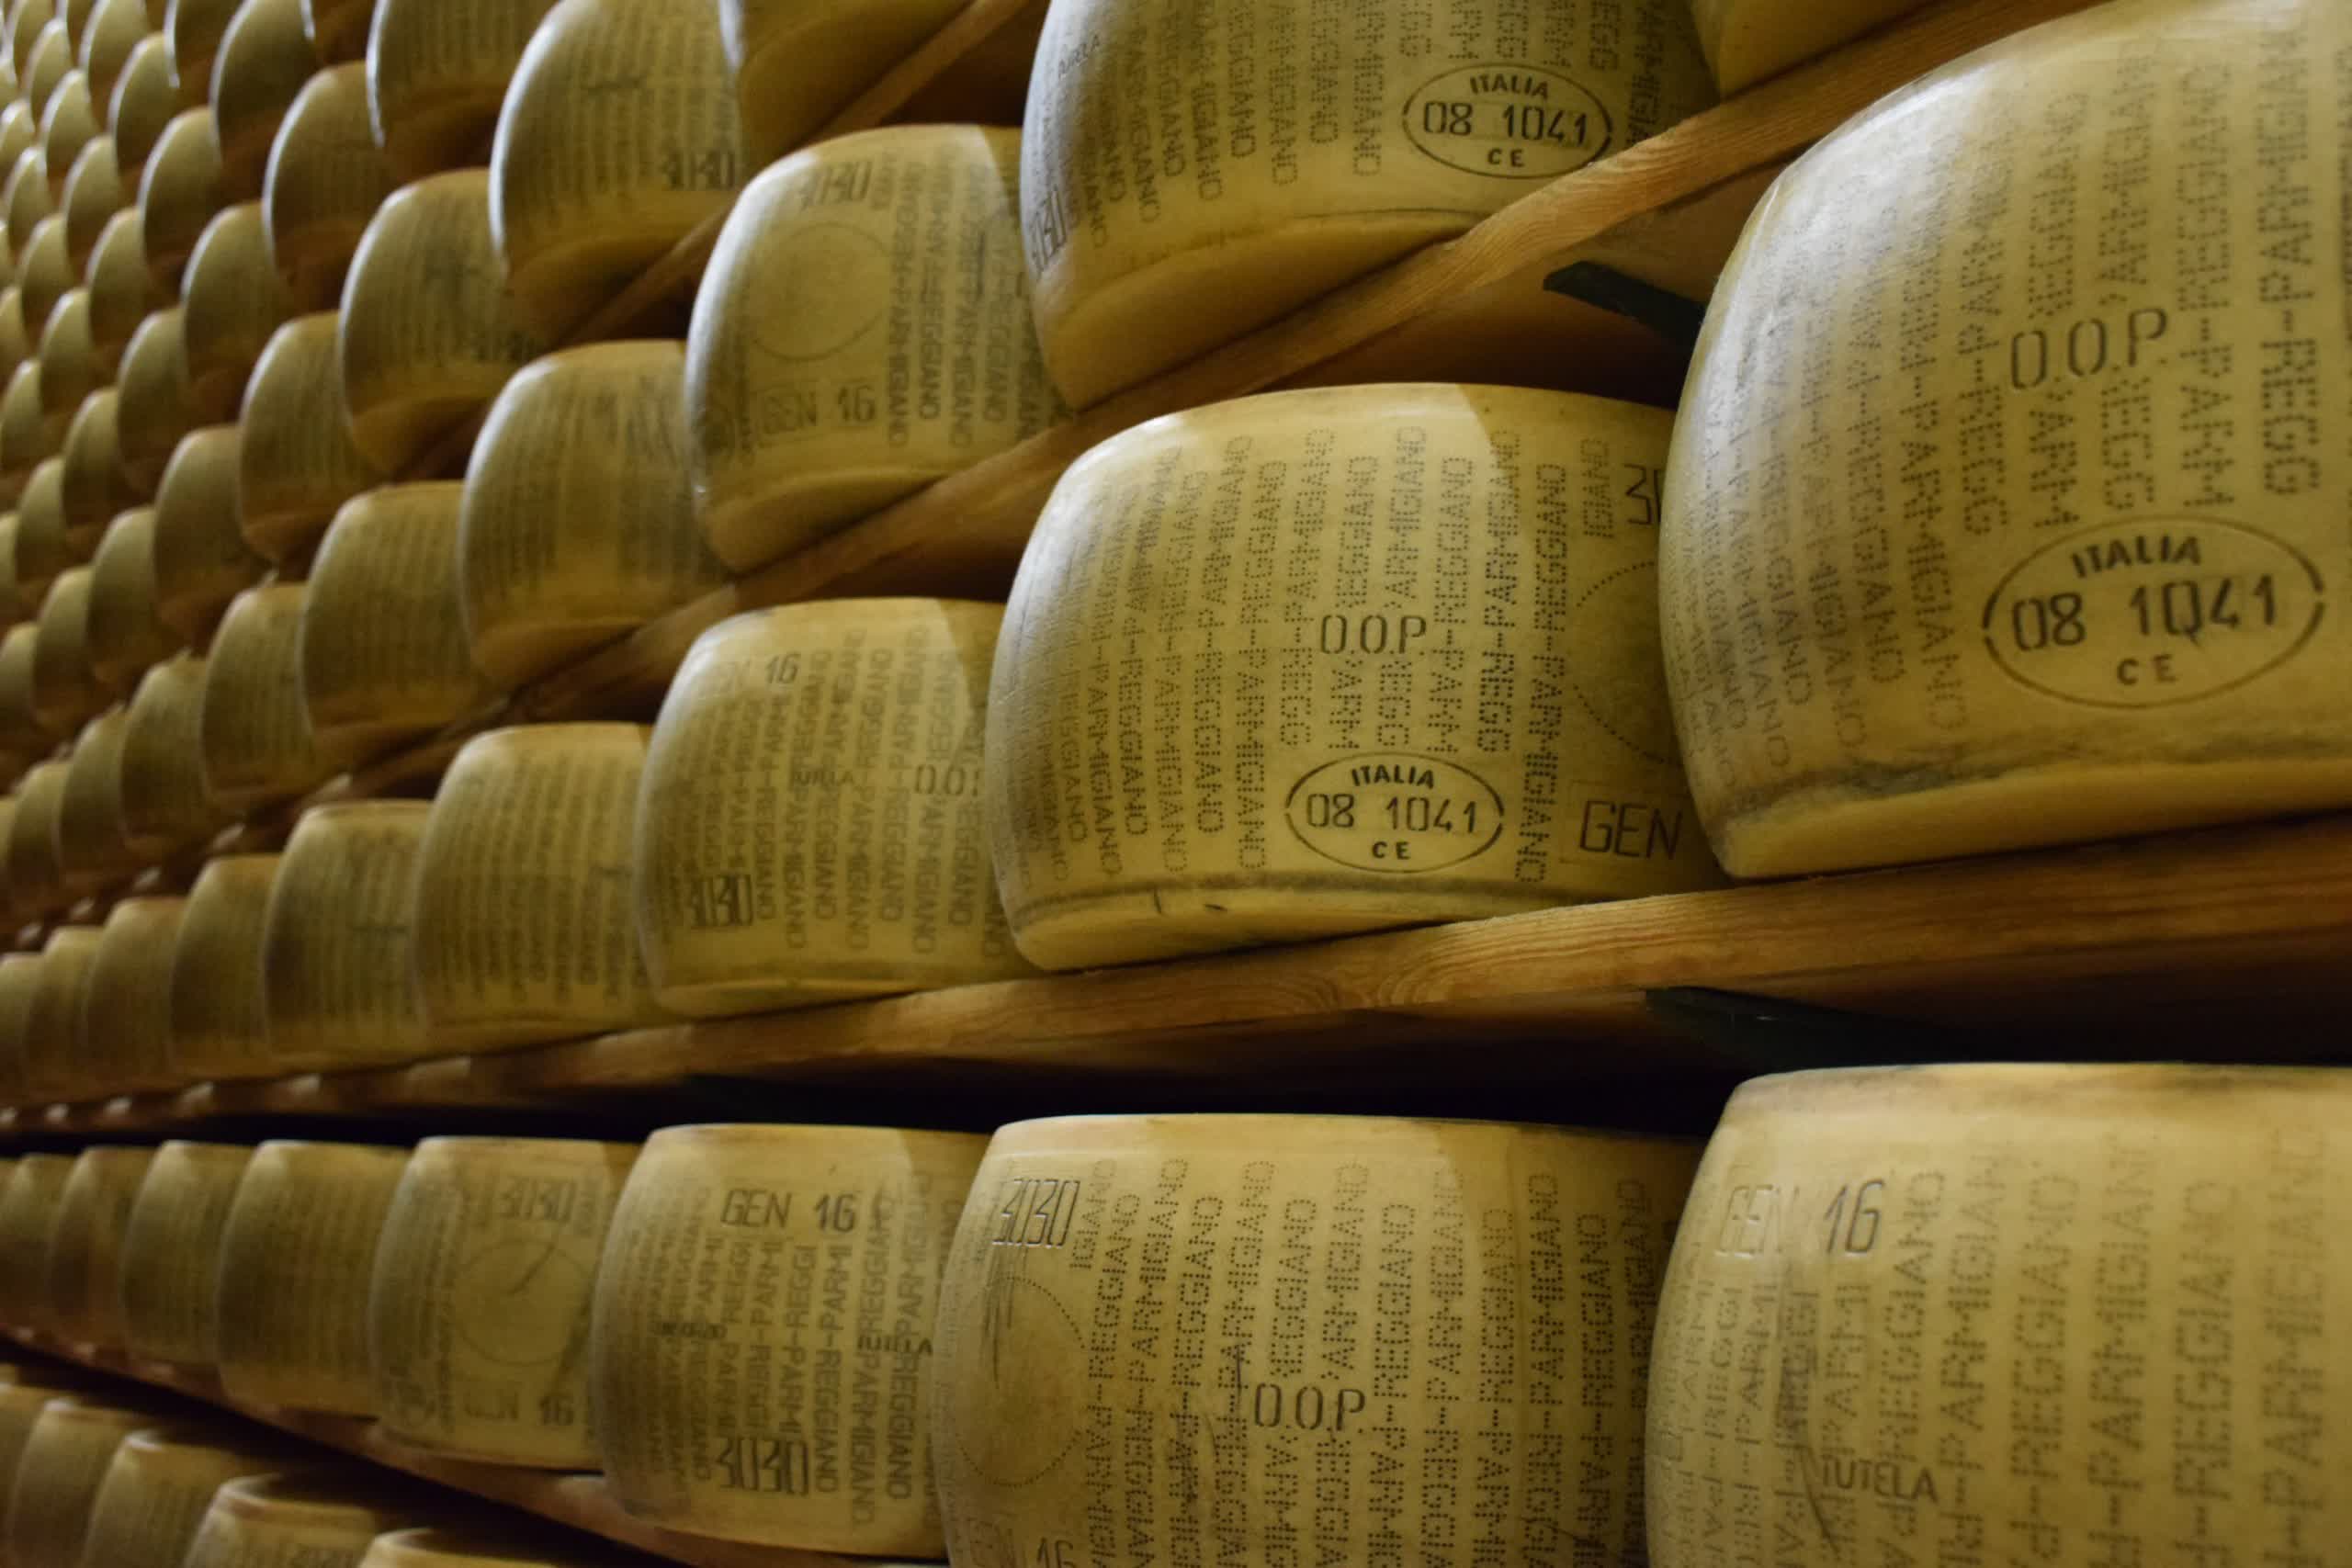 Italian cheesemakers chip their parmesan to combat the $2 billion counterfeiting industry